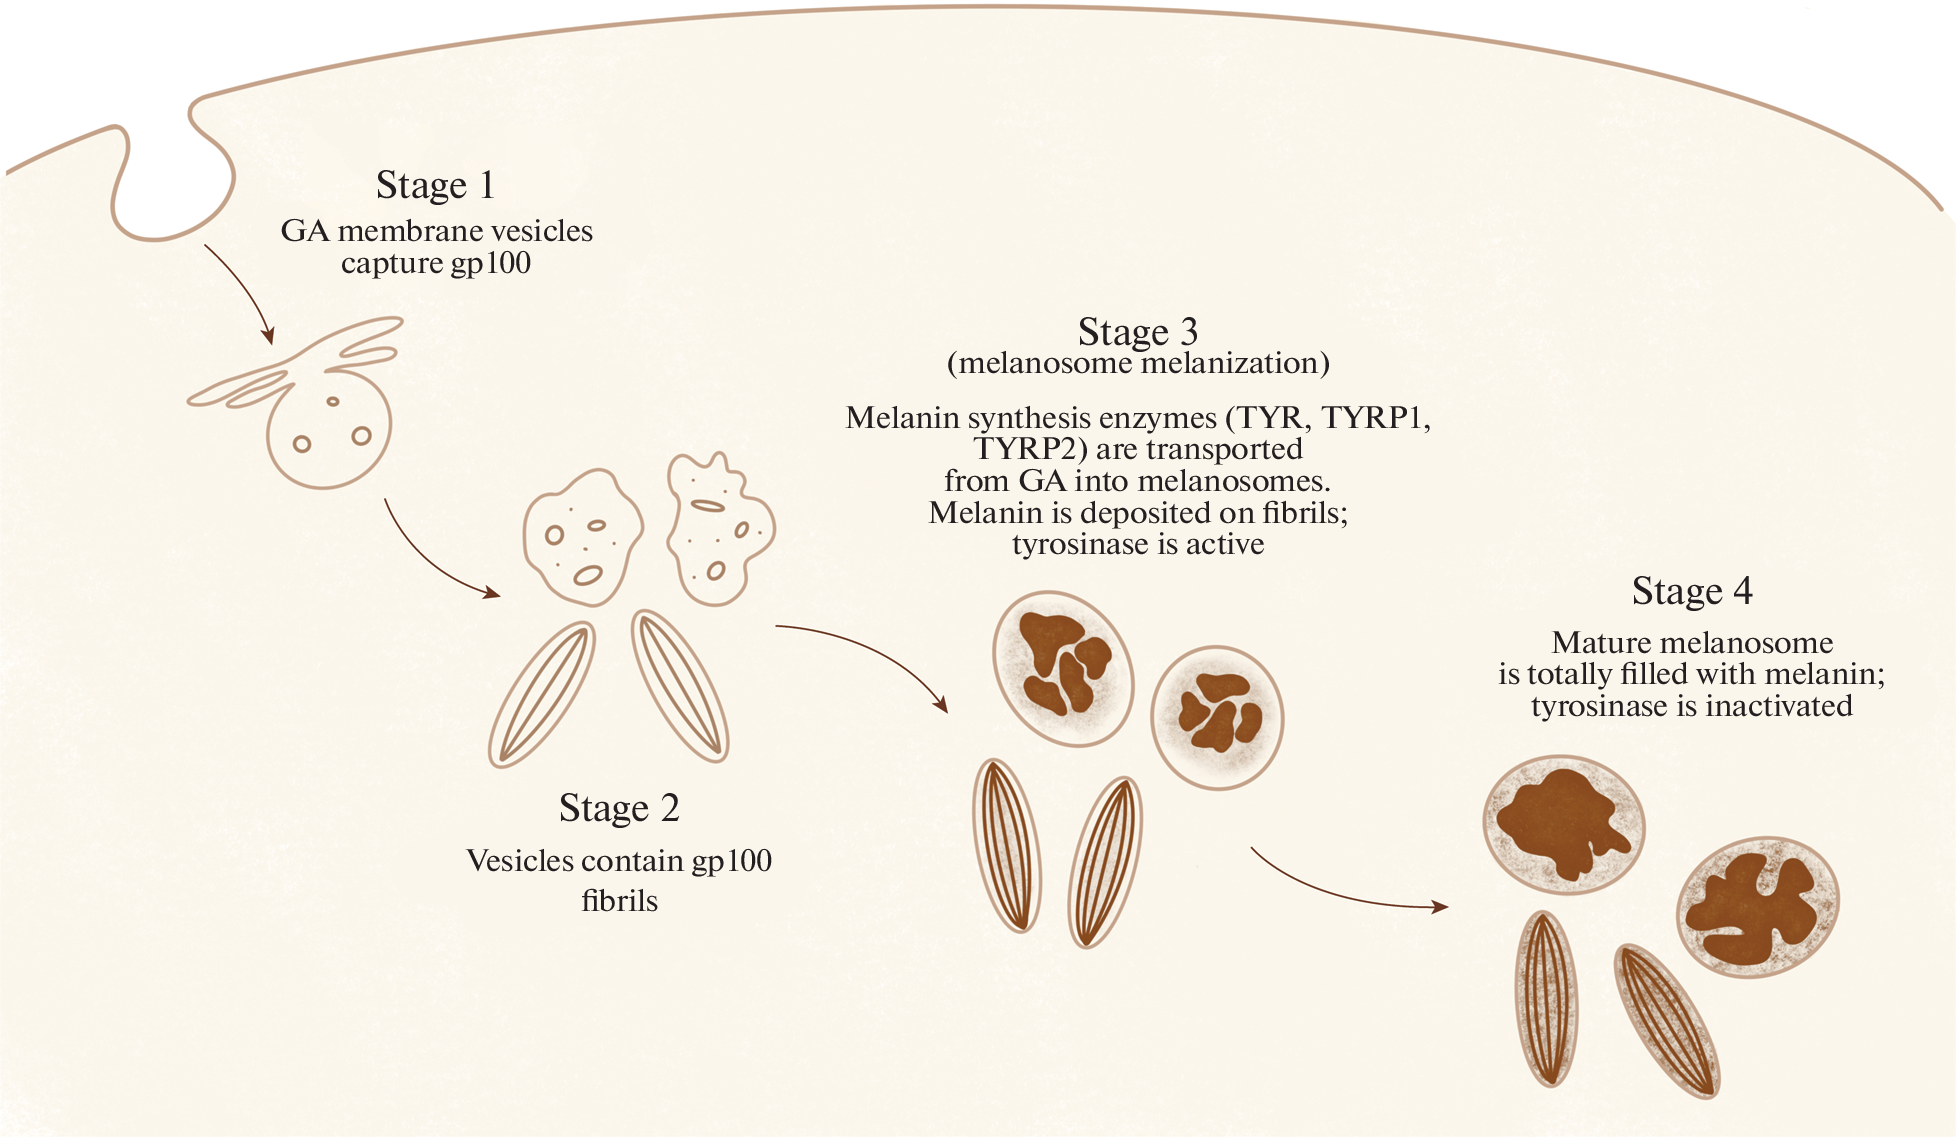 Uveal Melanoma: Molecular and Genetic Mechanisms of Development and Therapeutic Approaches